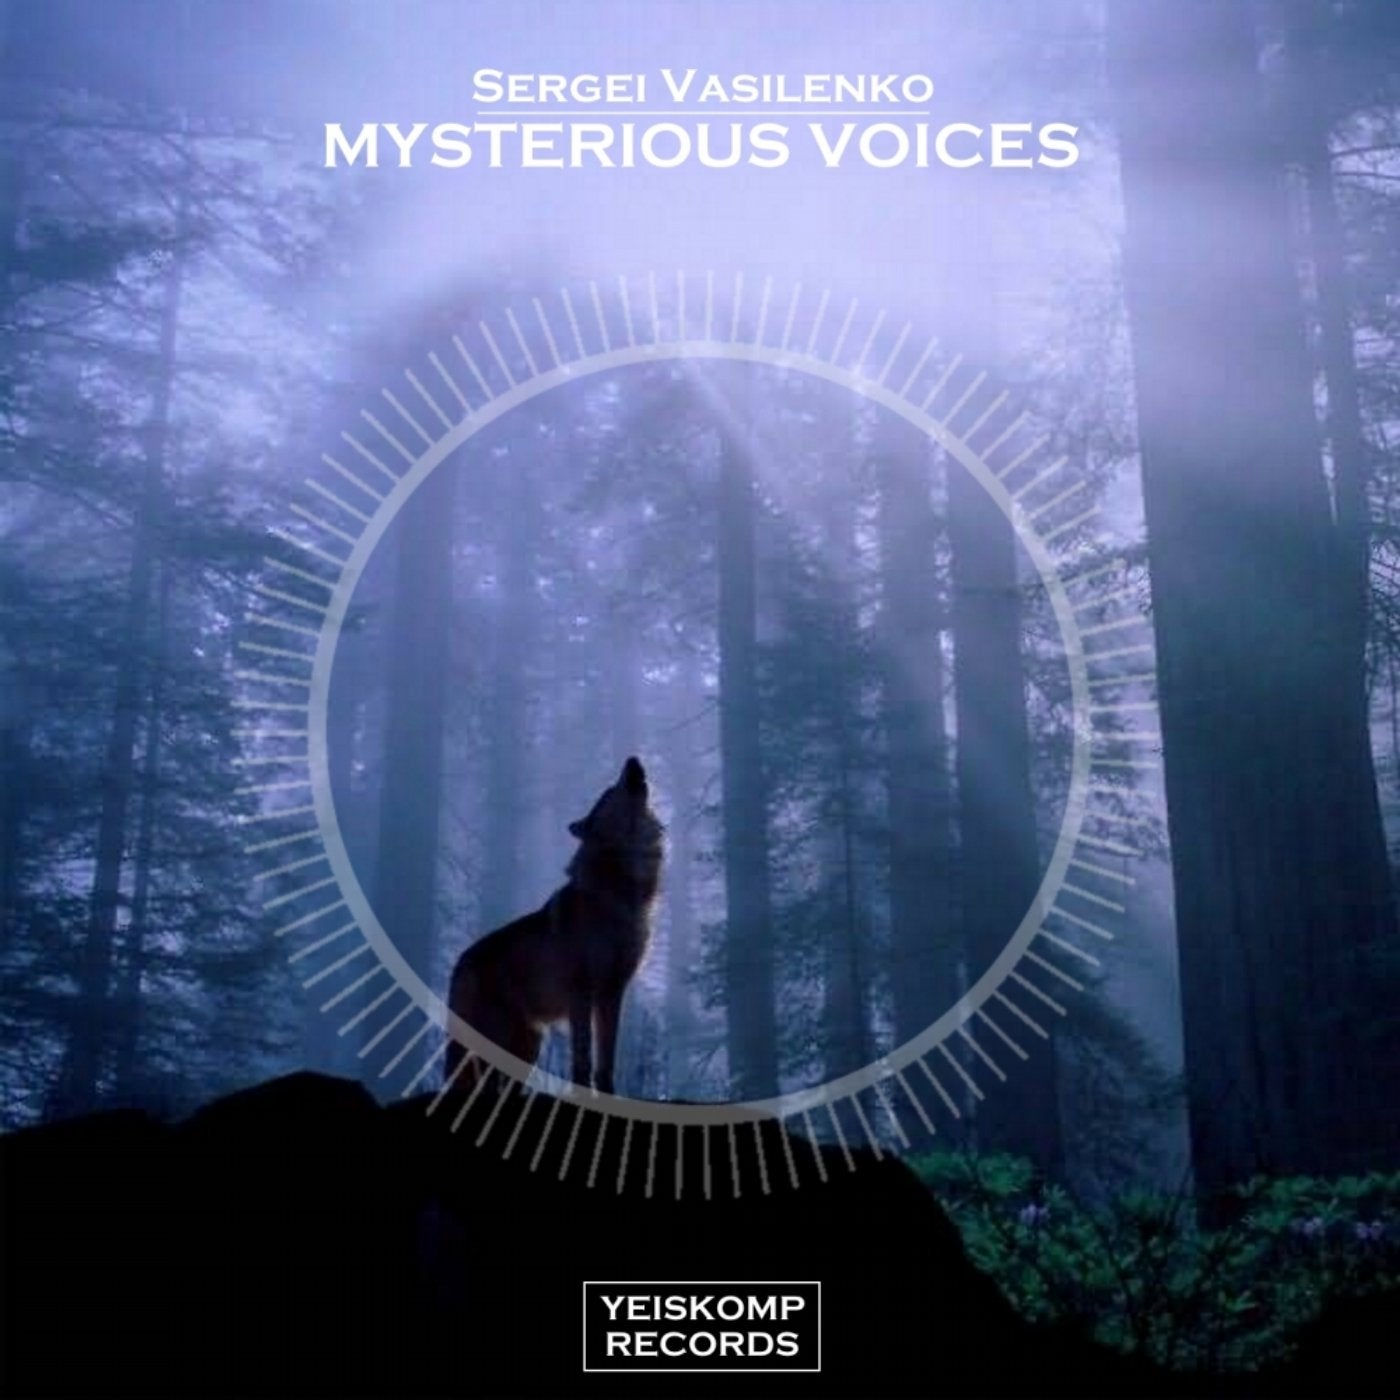 Mysterious Voices